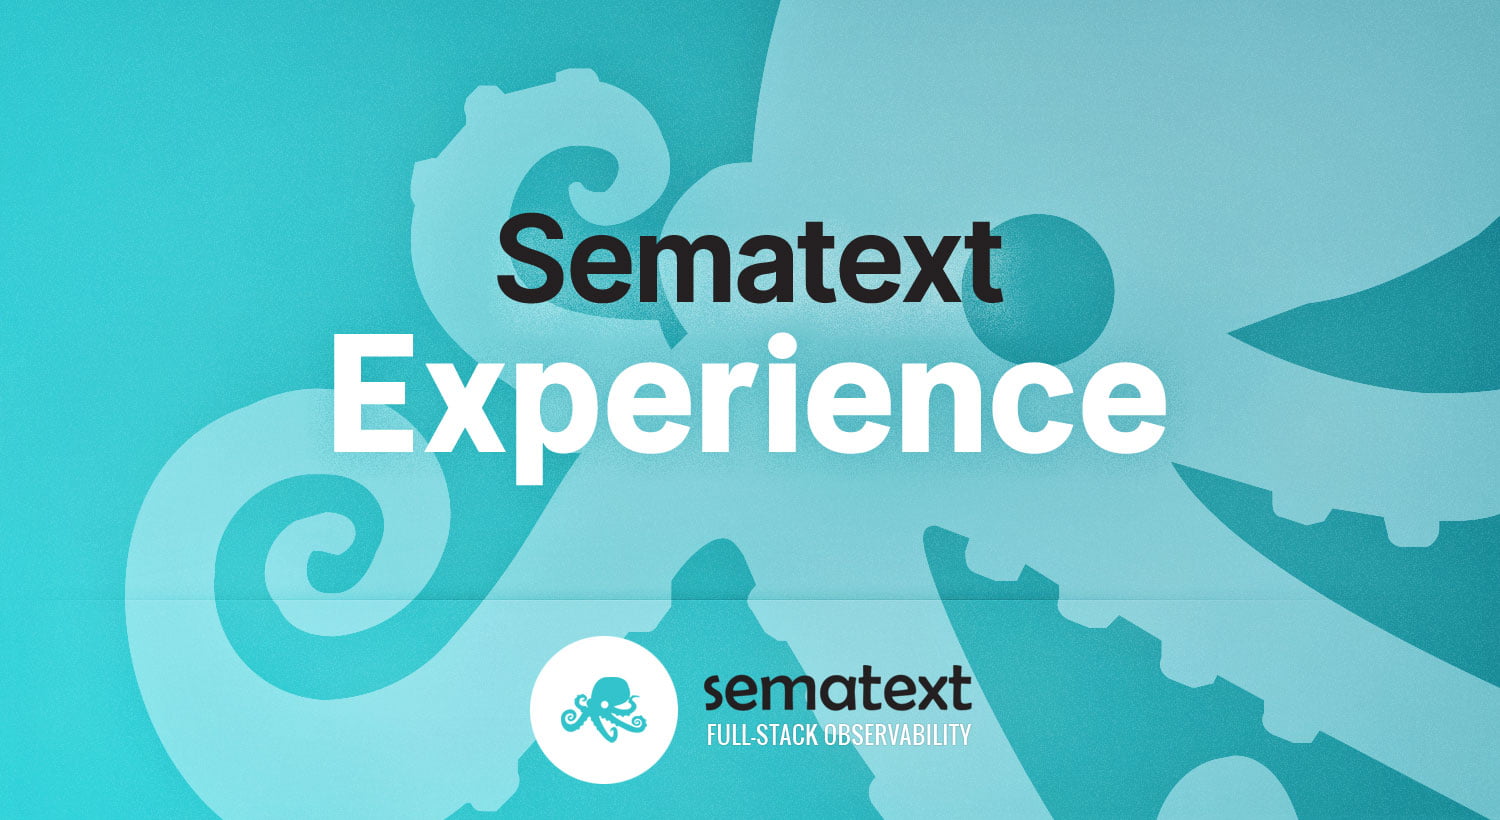 Sematext Experience is here